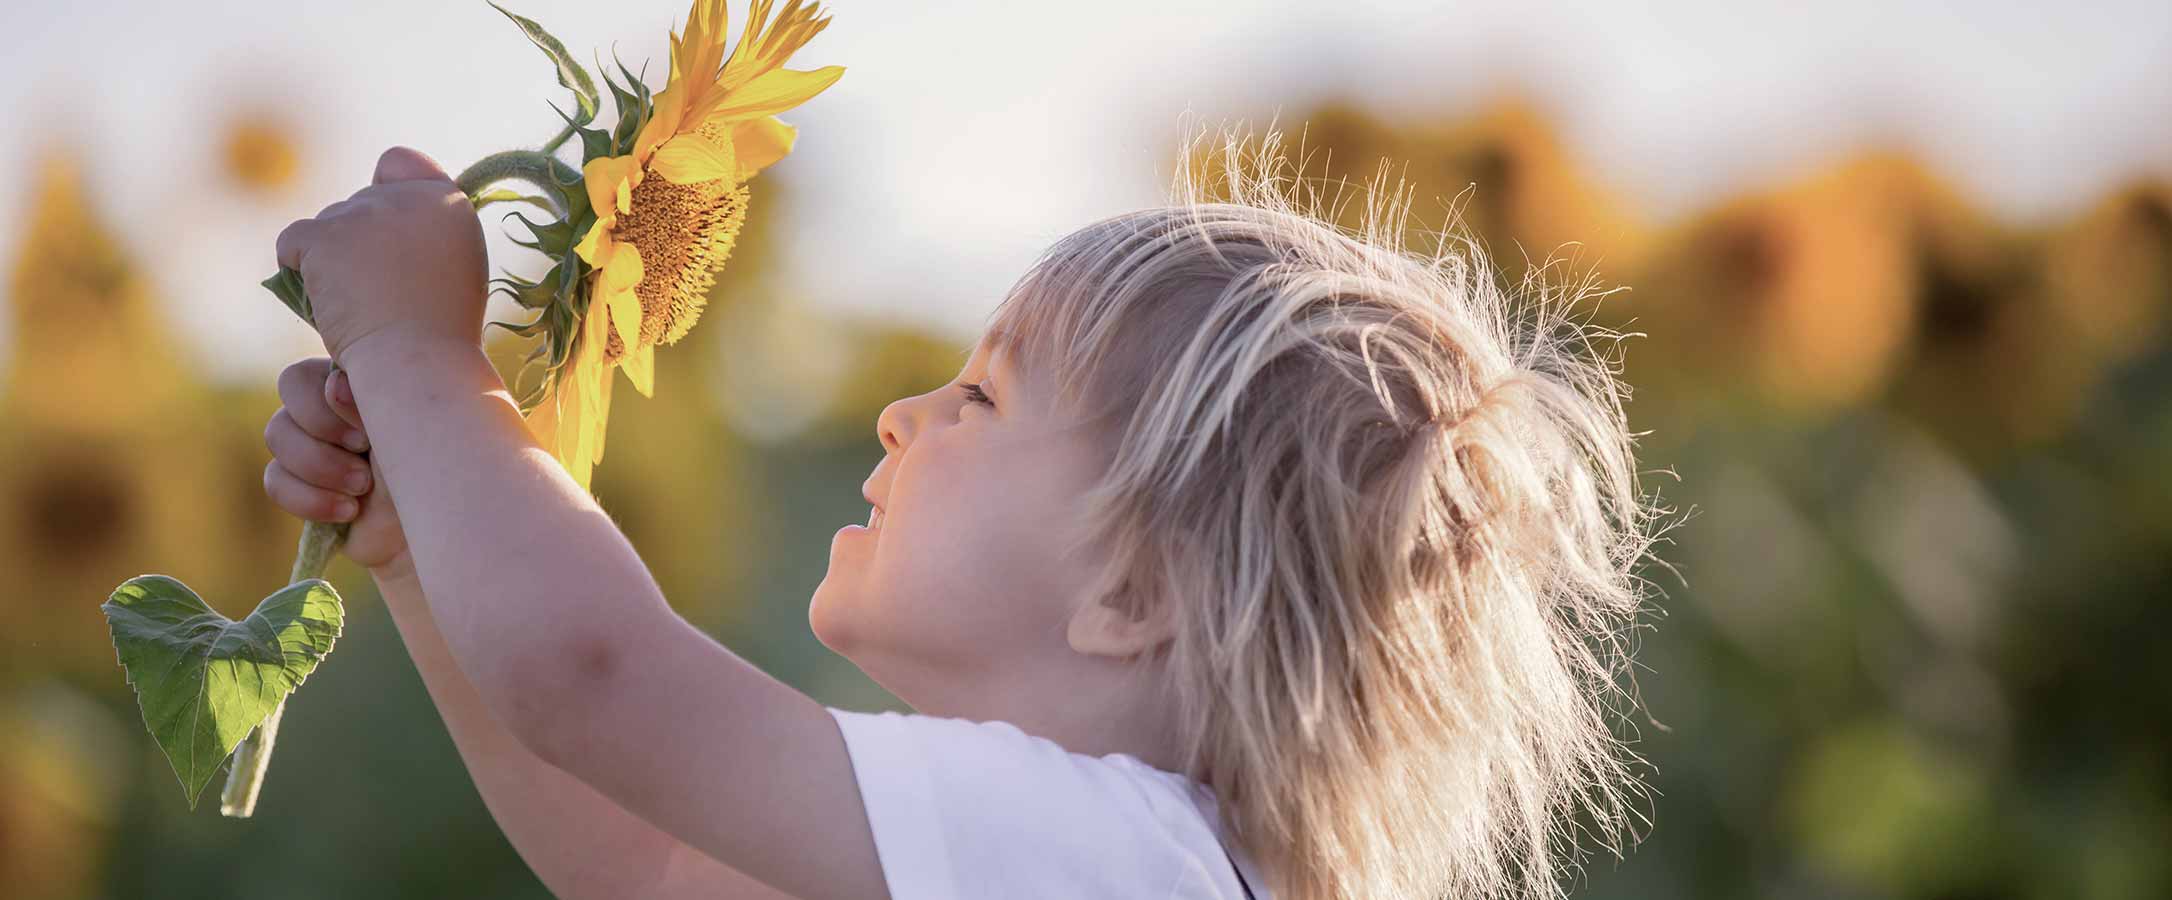 A young kid holding and smiling to a sunflower